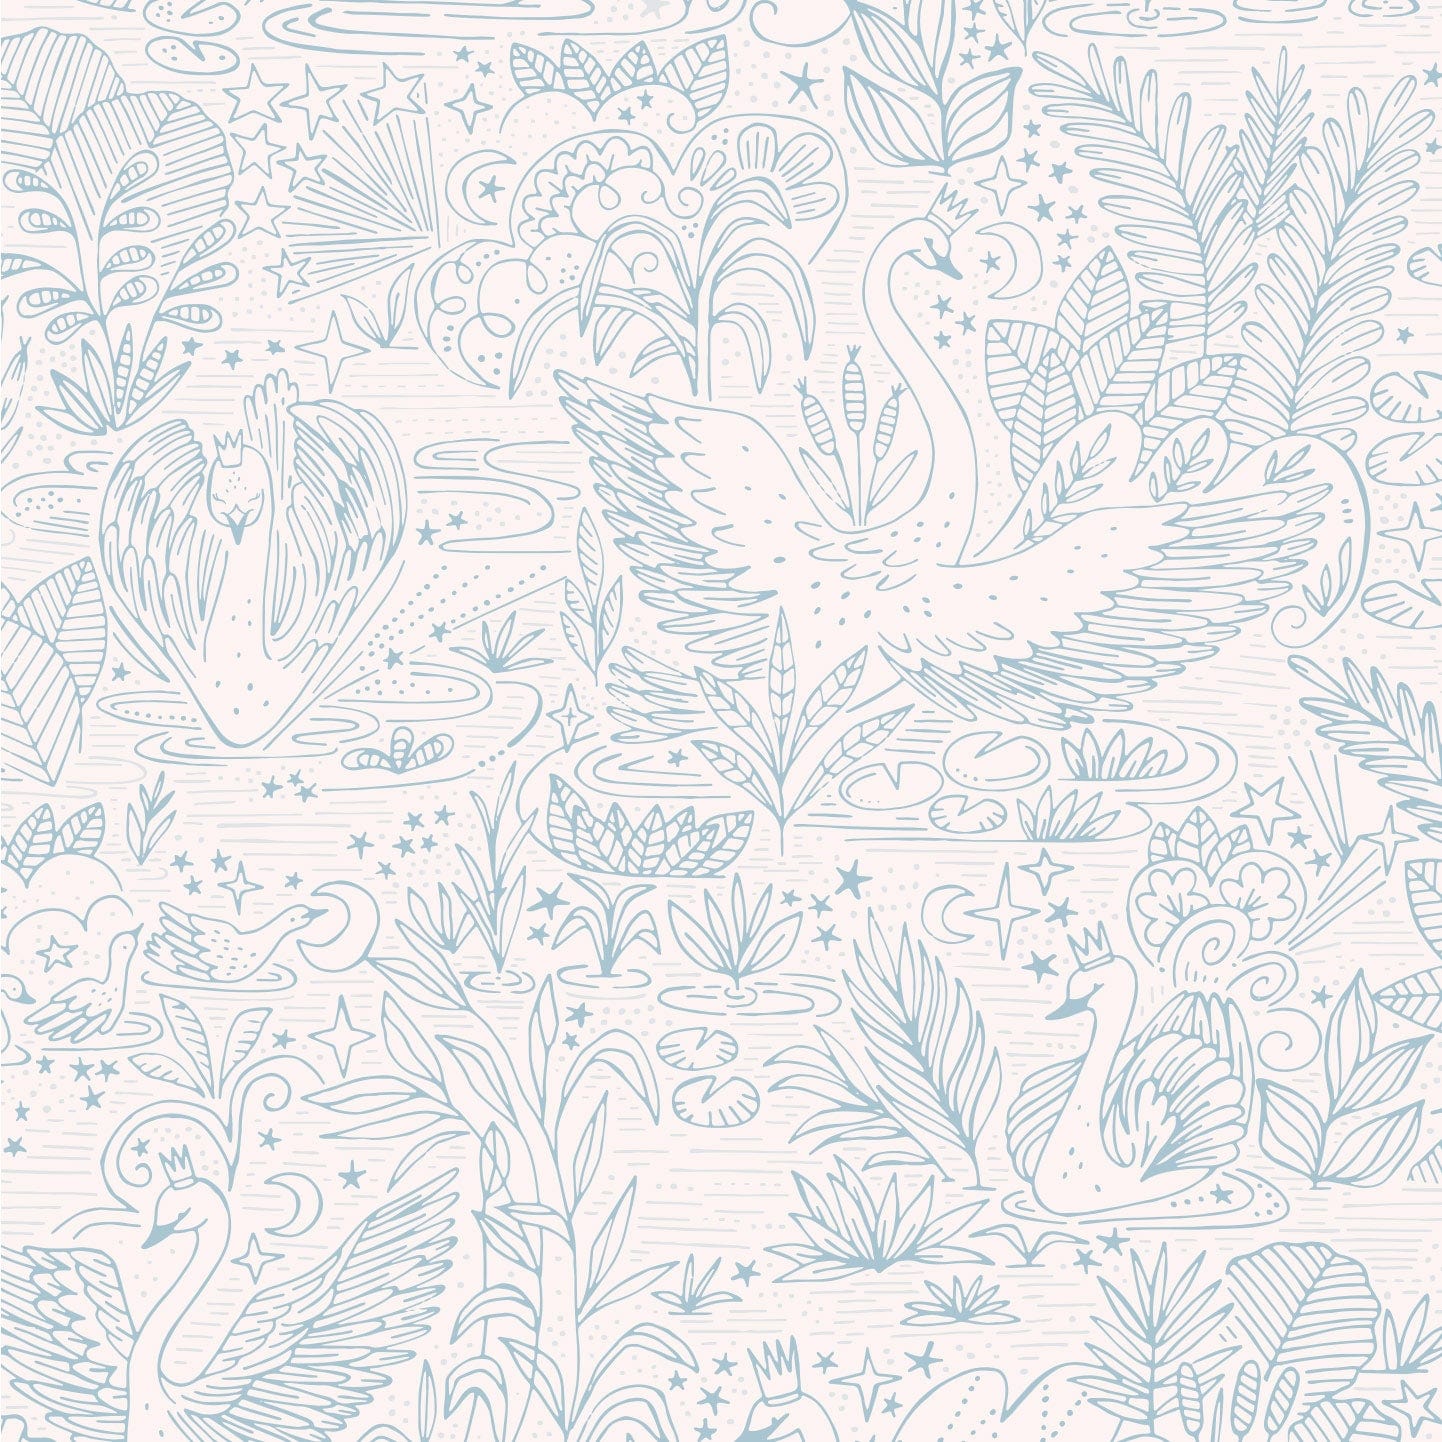 Wallpaper sample of very detailed floral print with swans gliding across a lake, flowers and leaves surround them. The print is line work and is all in blue